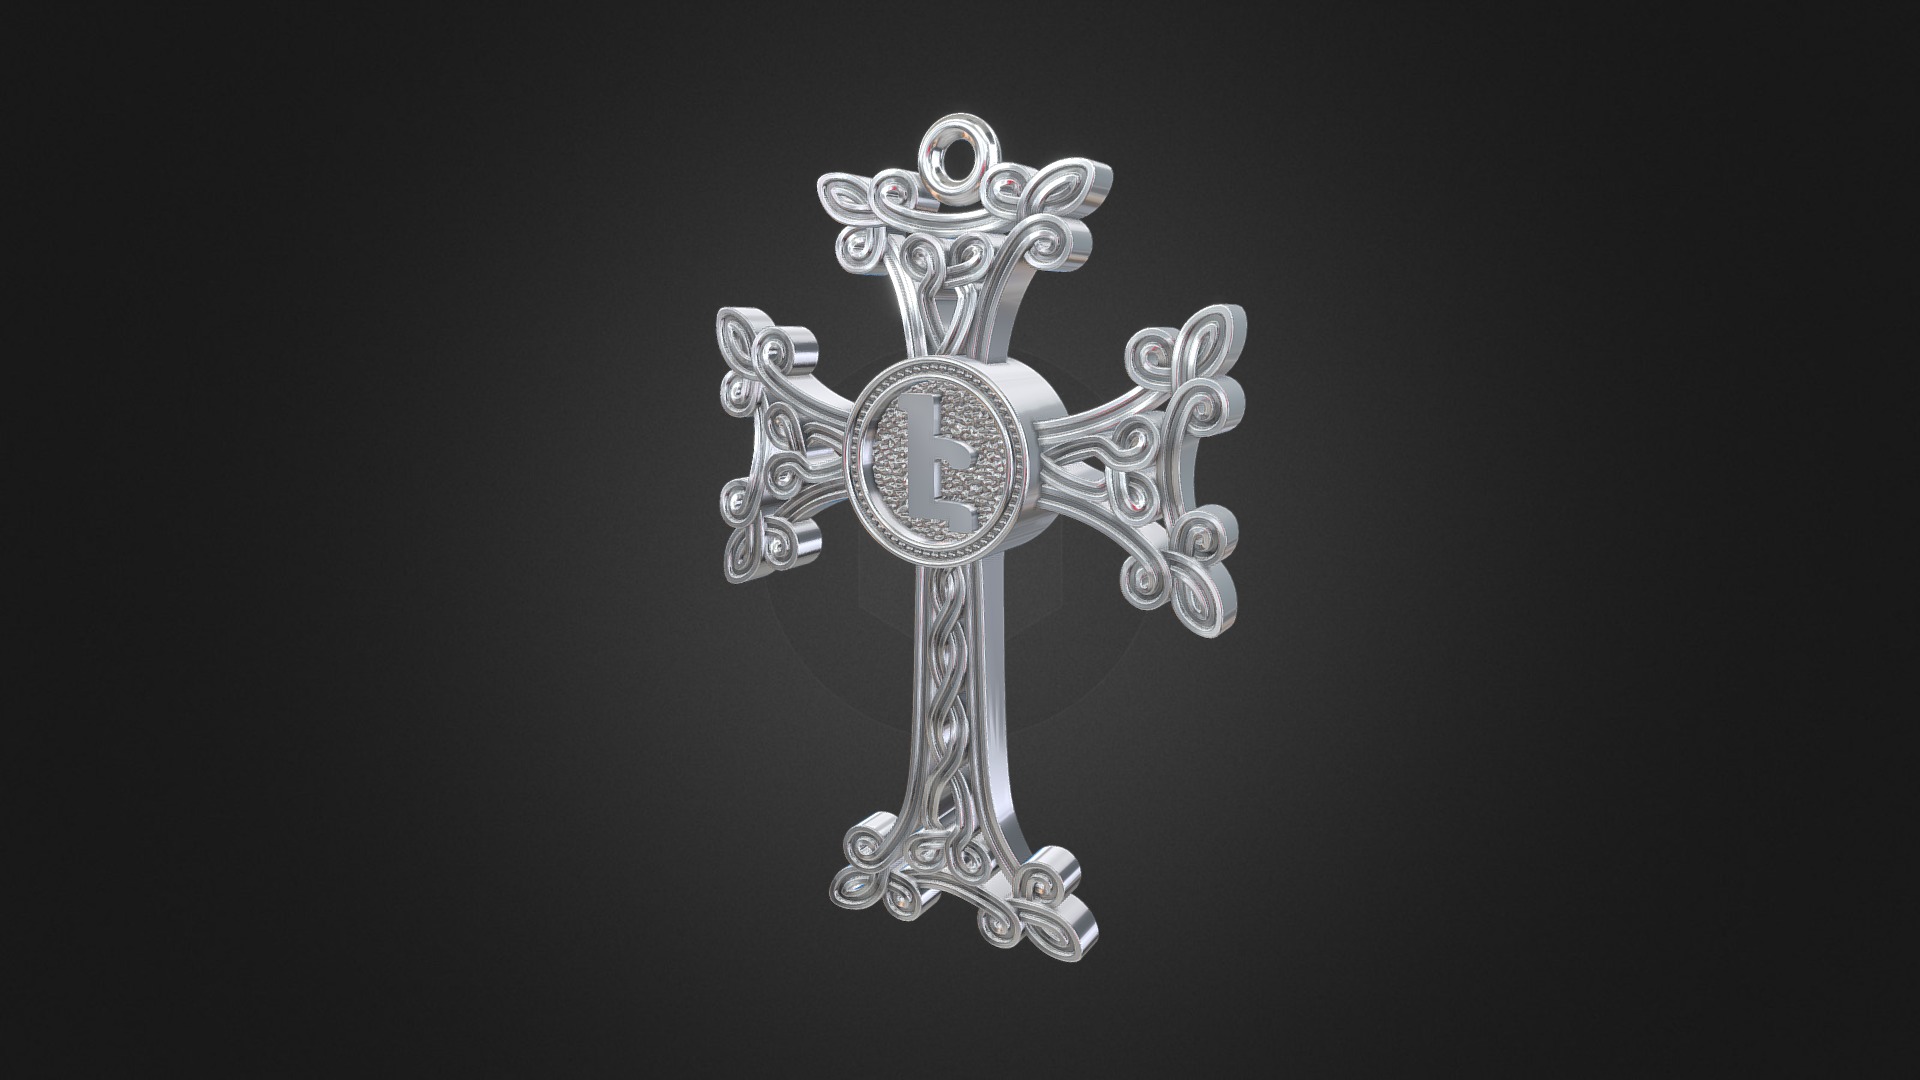 3D model 1057 – Cross - This is a 3D model of the 1057 - Cross. The 3D model is about a gold and silver cross.